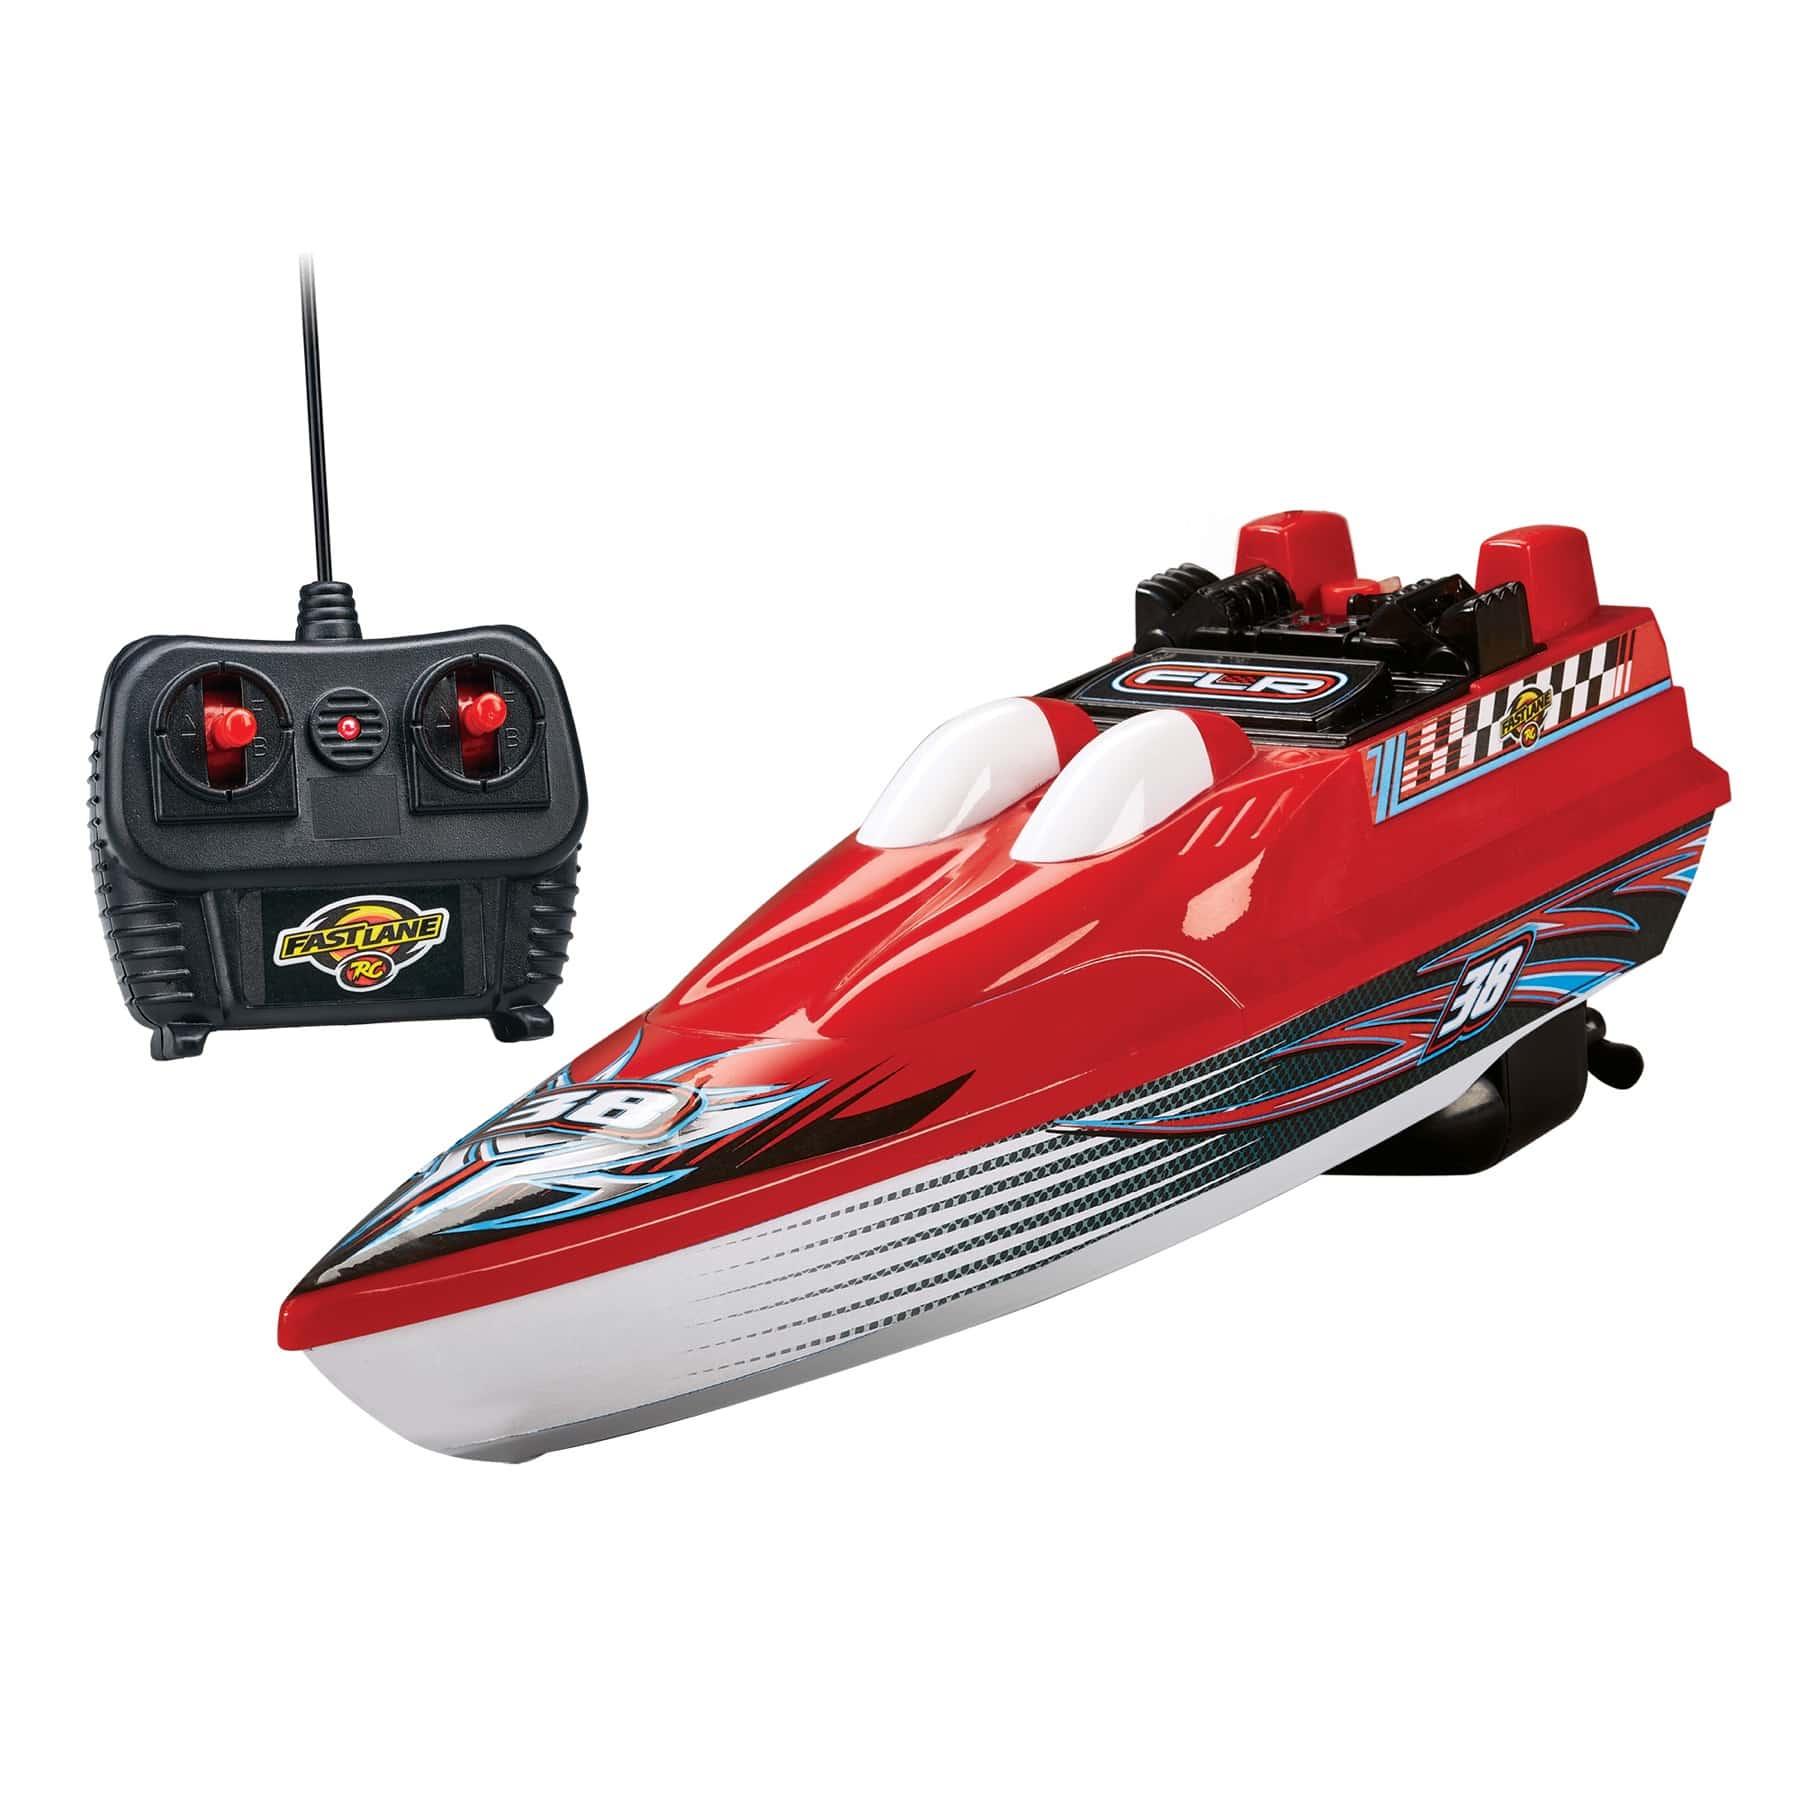 Fast Lane Rc Boat: Benefits of a Fast Lane RC Boat